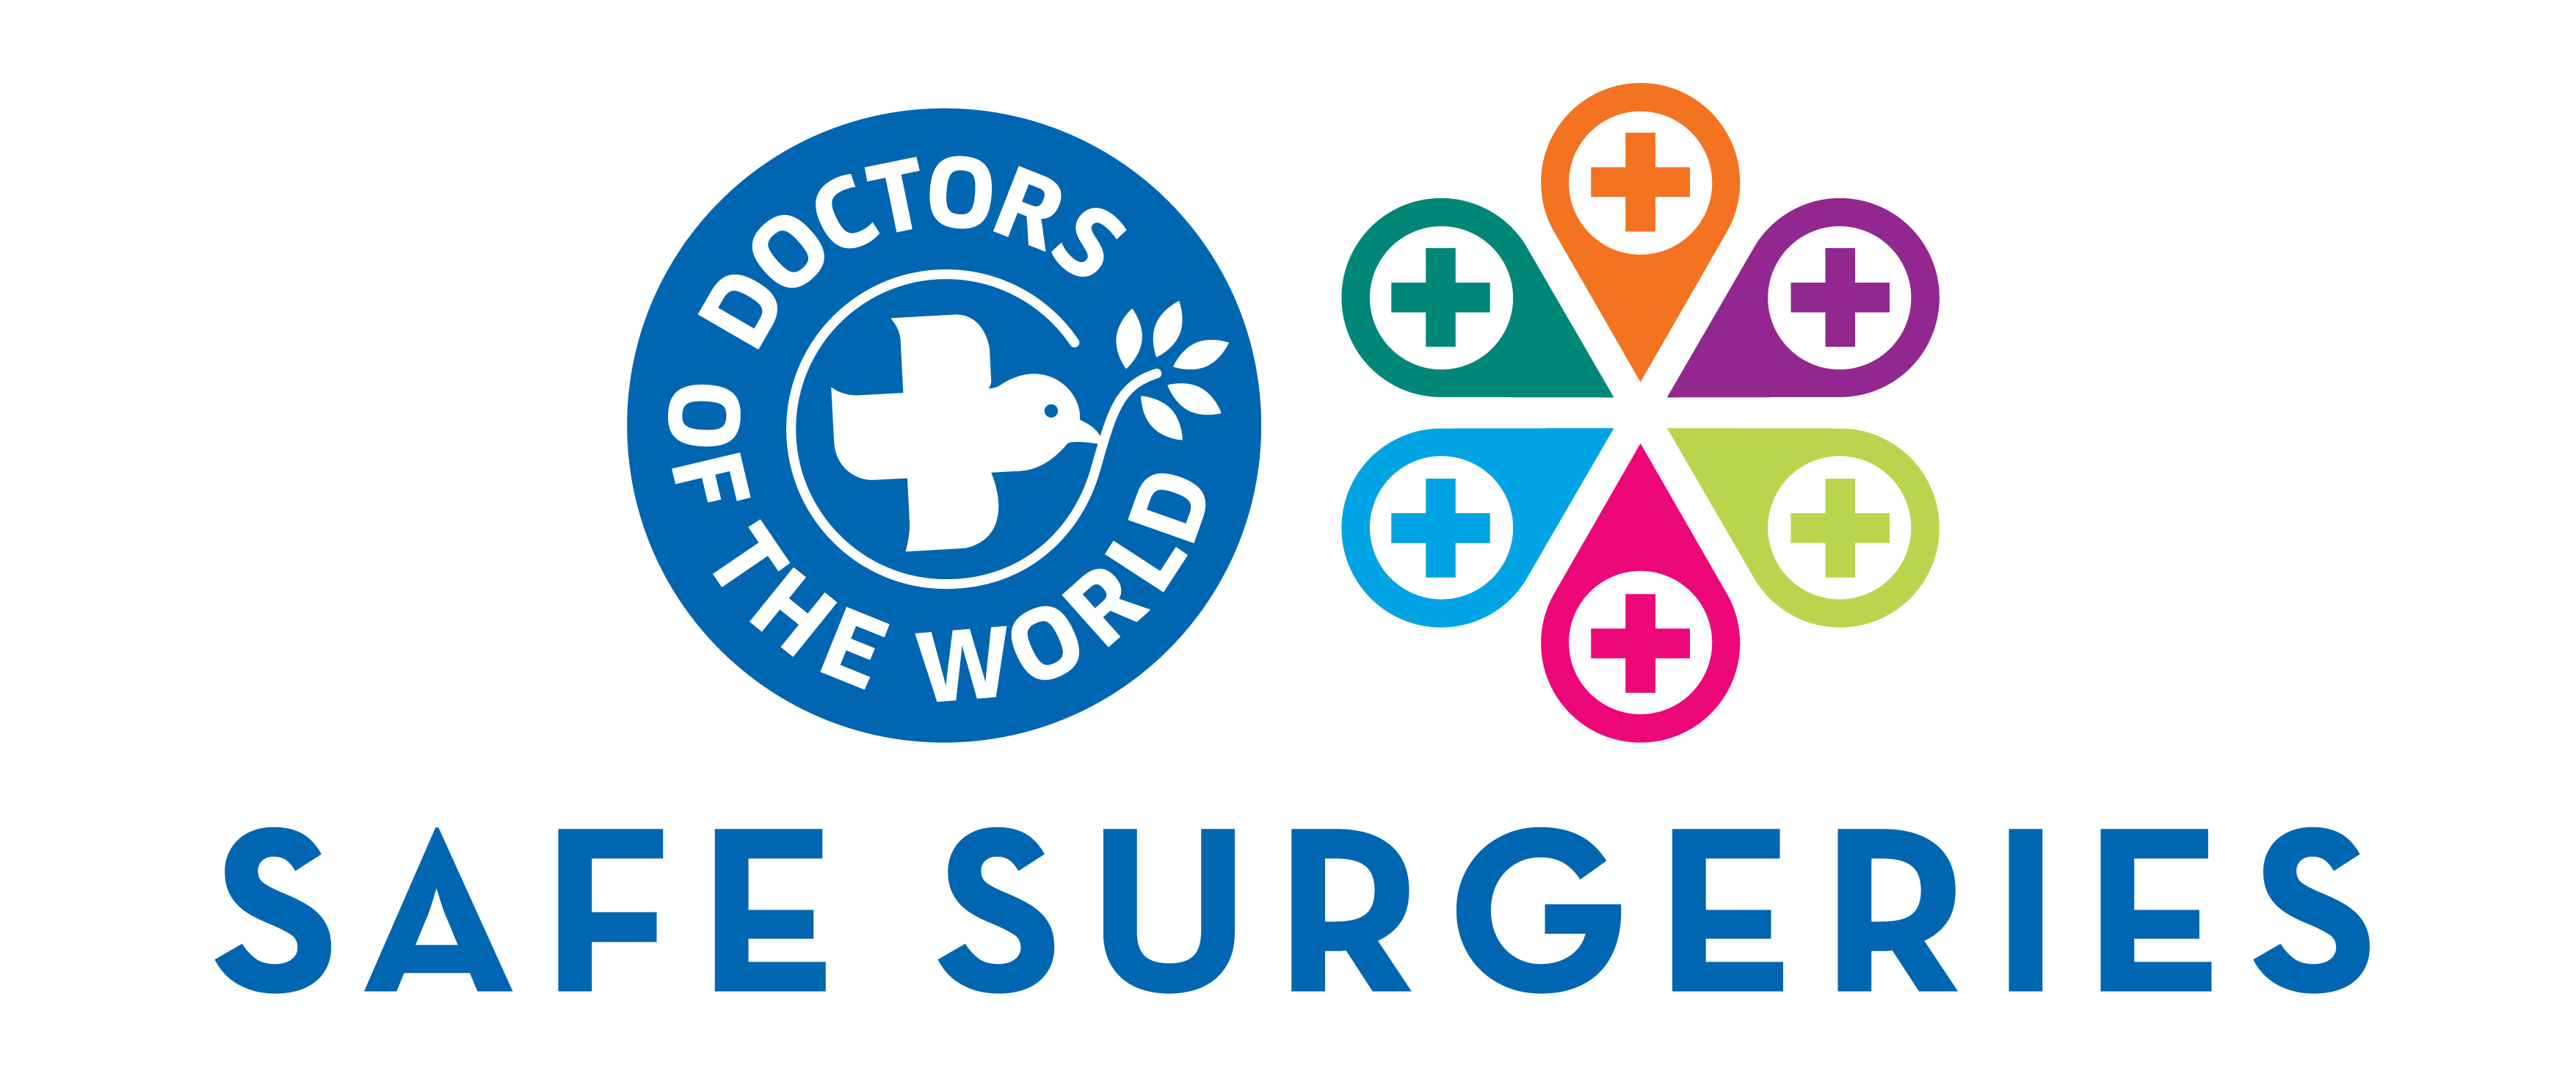 Doctors of the world and safe surgeries